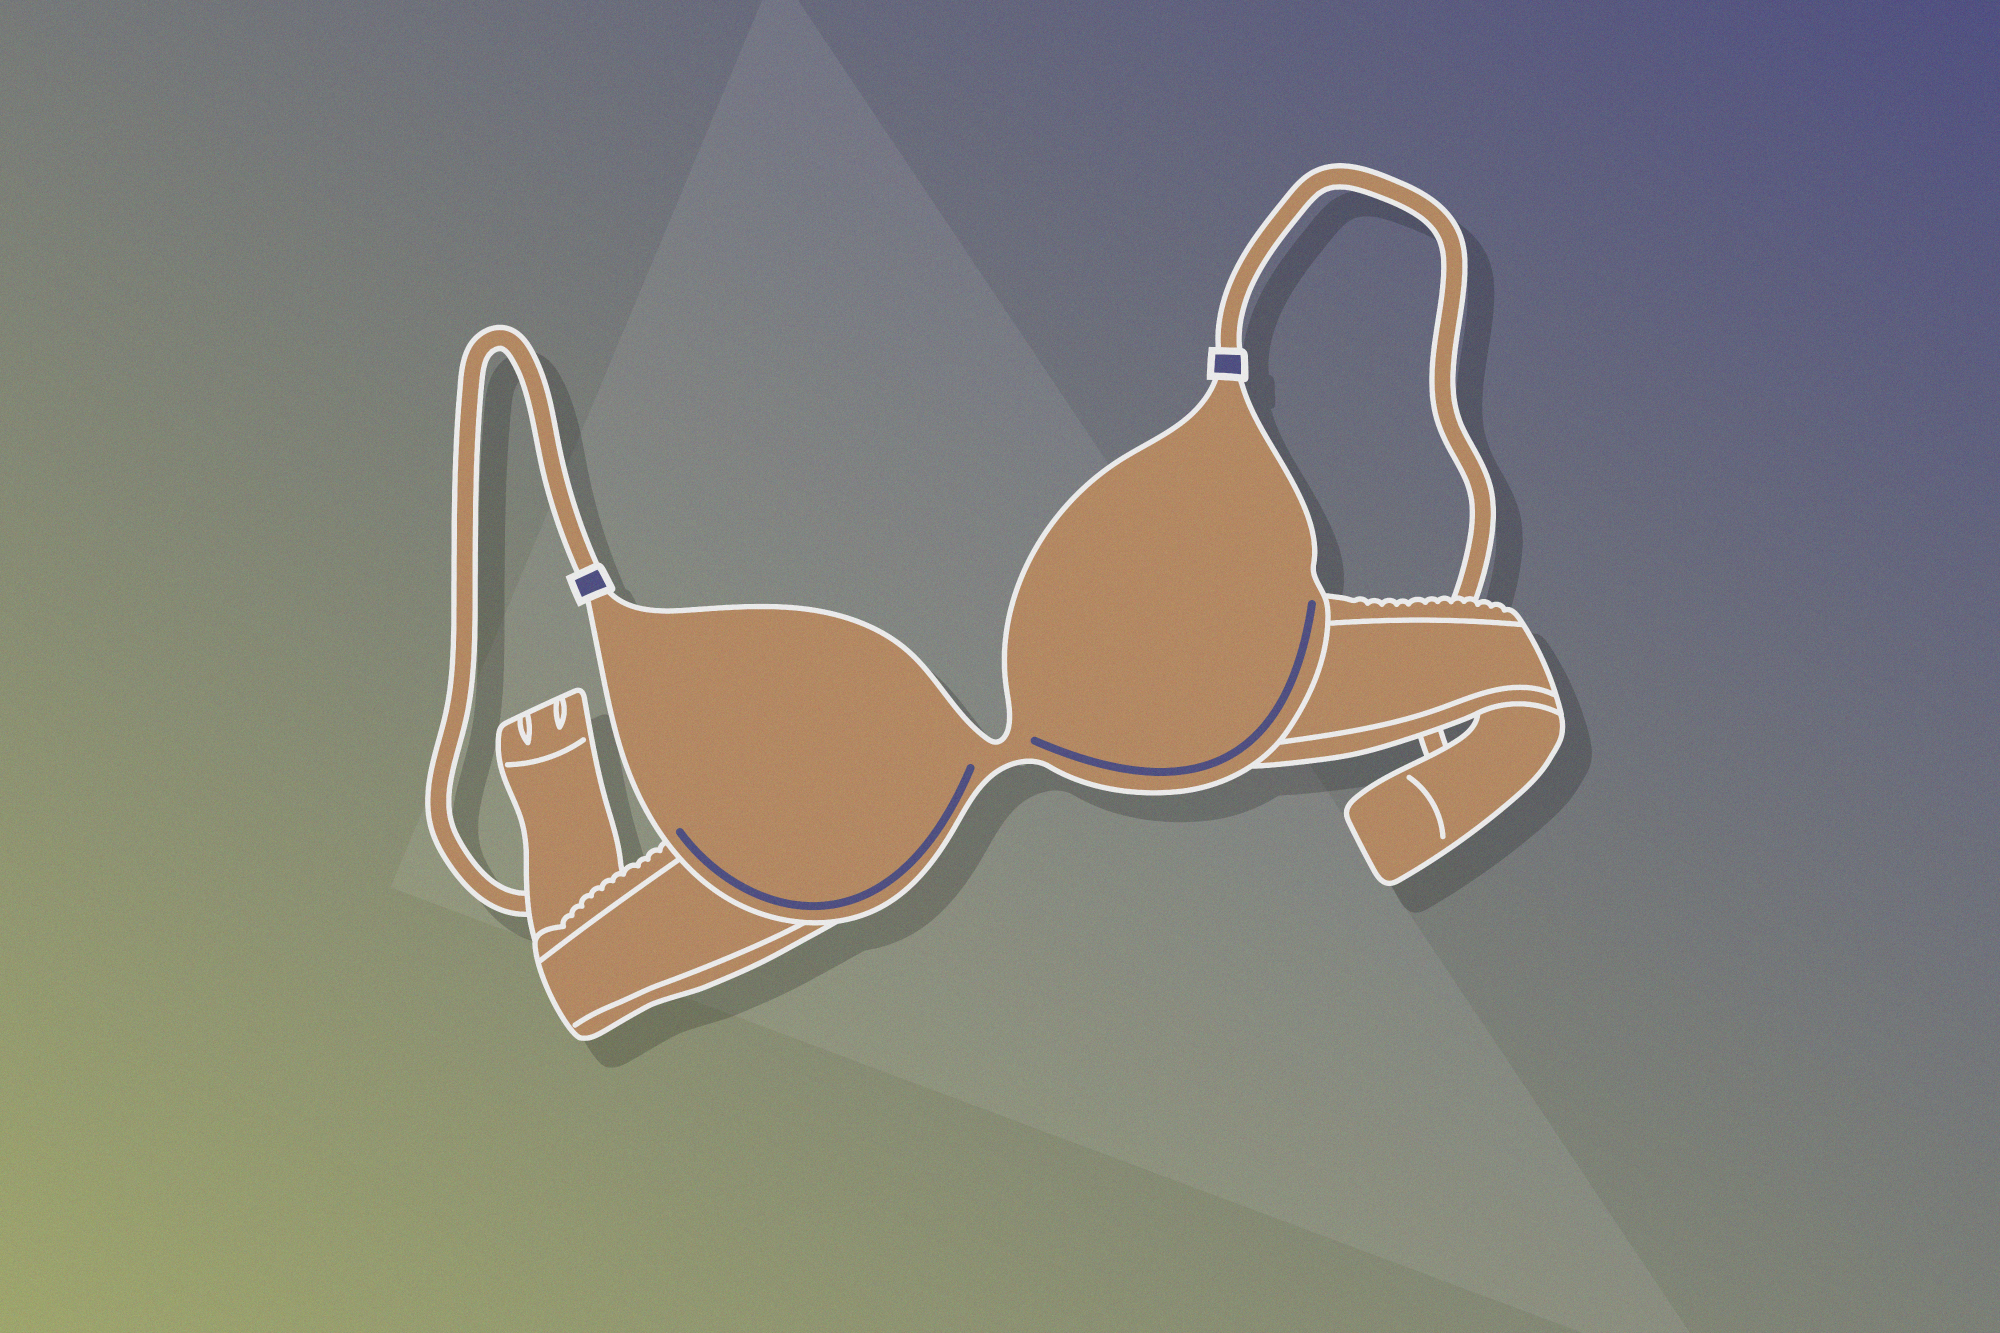 Disadvantages of Wearing Bra: 4 Ways Your Bra is SERIOUSLY Damaging your  Health!